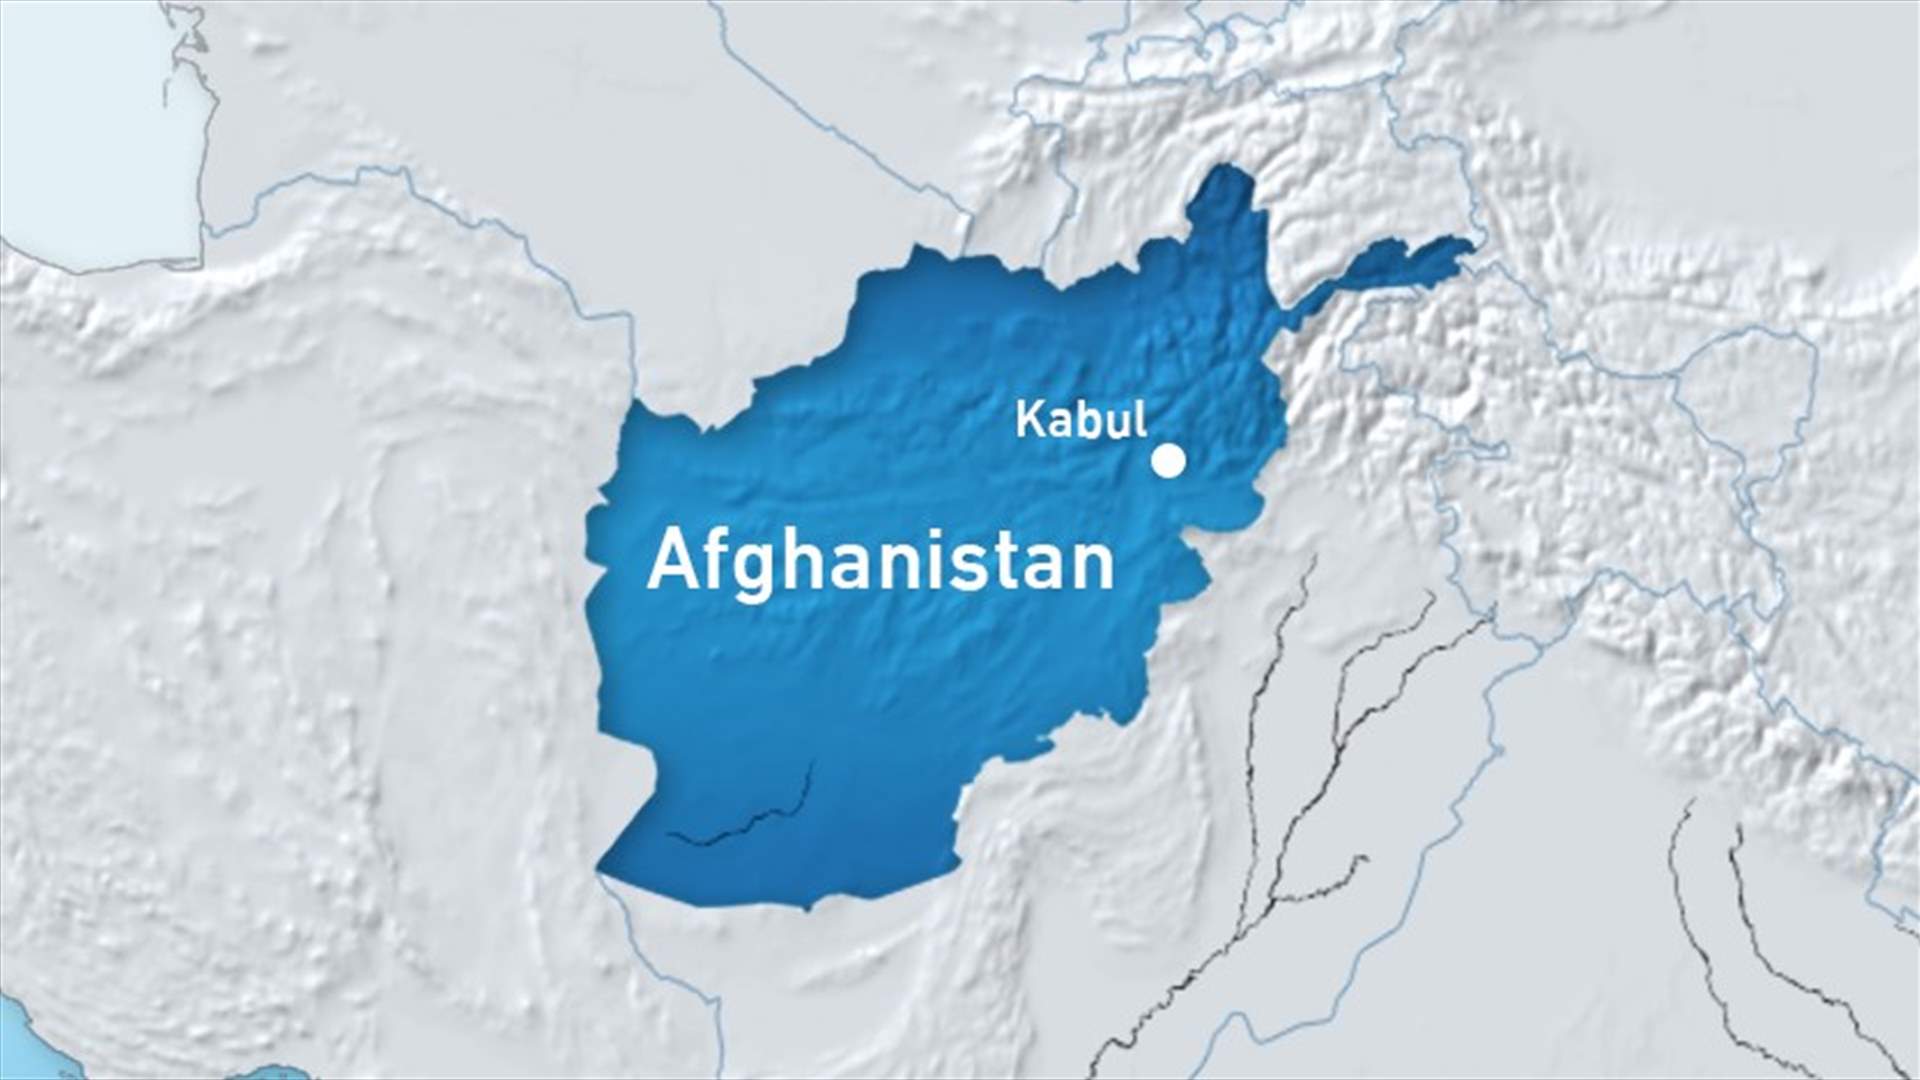 Ten killed in suicide attack near Afghan capital